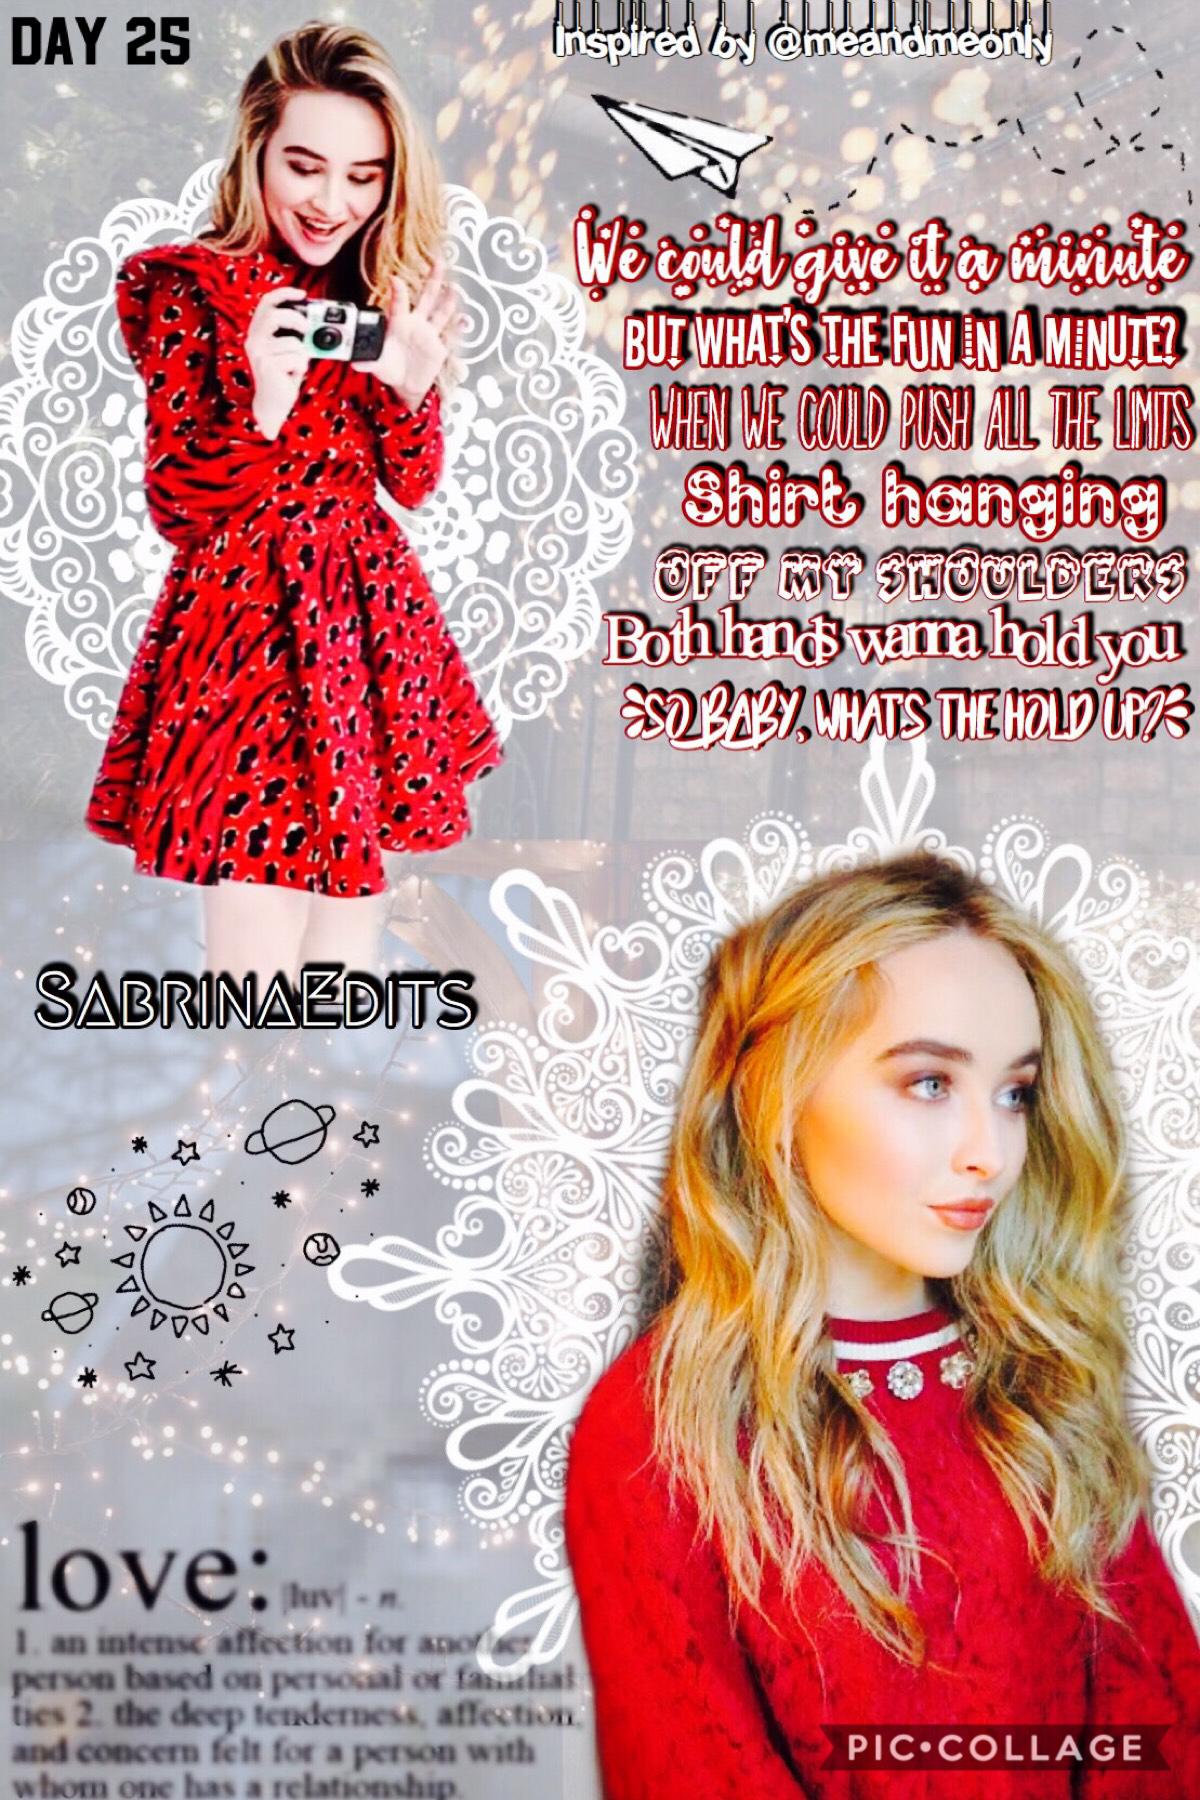 💓Tap💓
This is so late and i am so sorry i didn’t completely plan out when i was supposed to be posting and i’m so sorry. comment “💔” if you read this. hope you like my edit of Sabrina Carpenter 